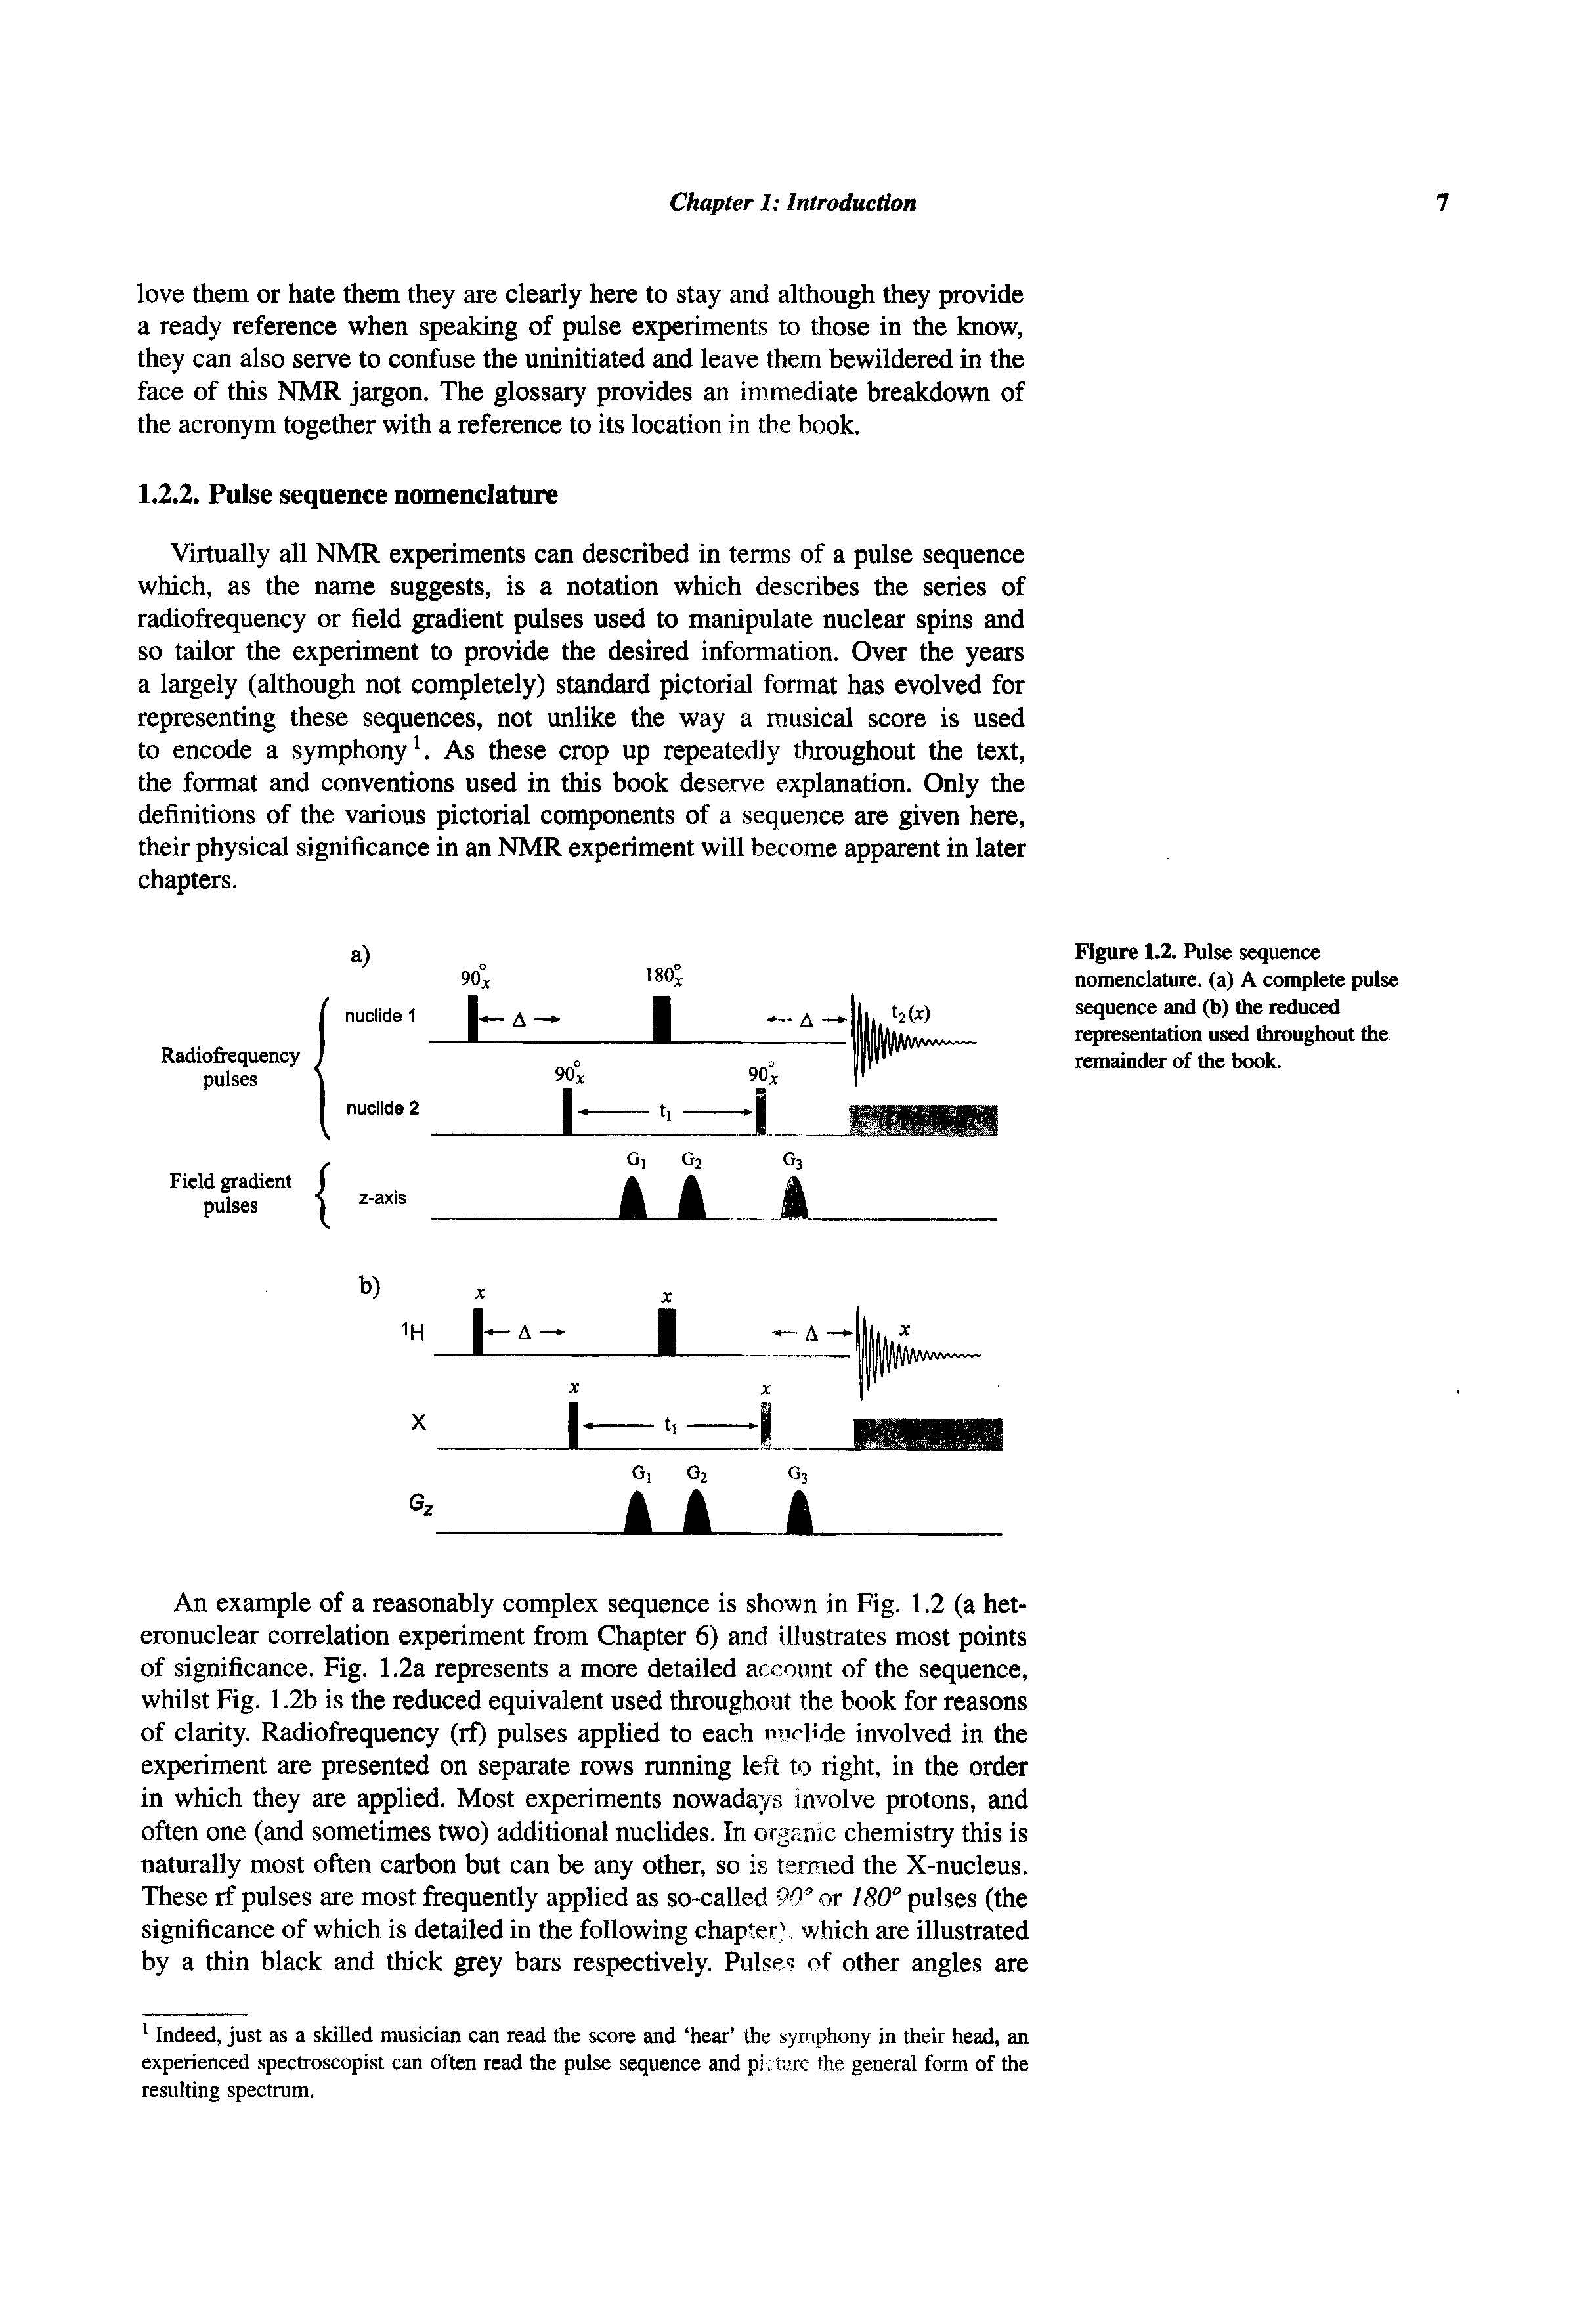 Figure U. Pulse sequence nomenclature, (a) A complete pulse sequence and (b) the reduced representation used throughout the remainder of the book.